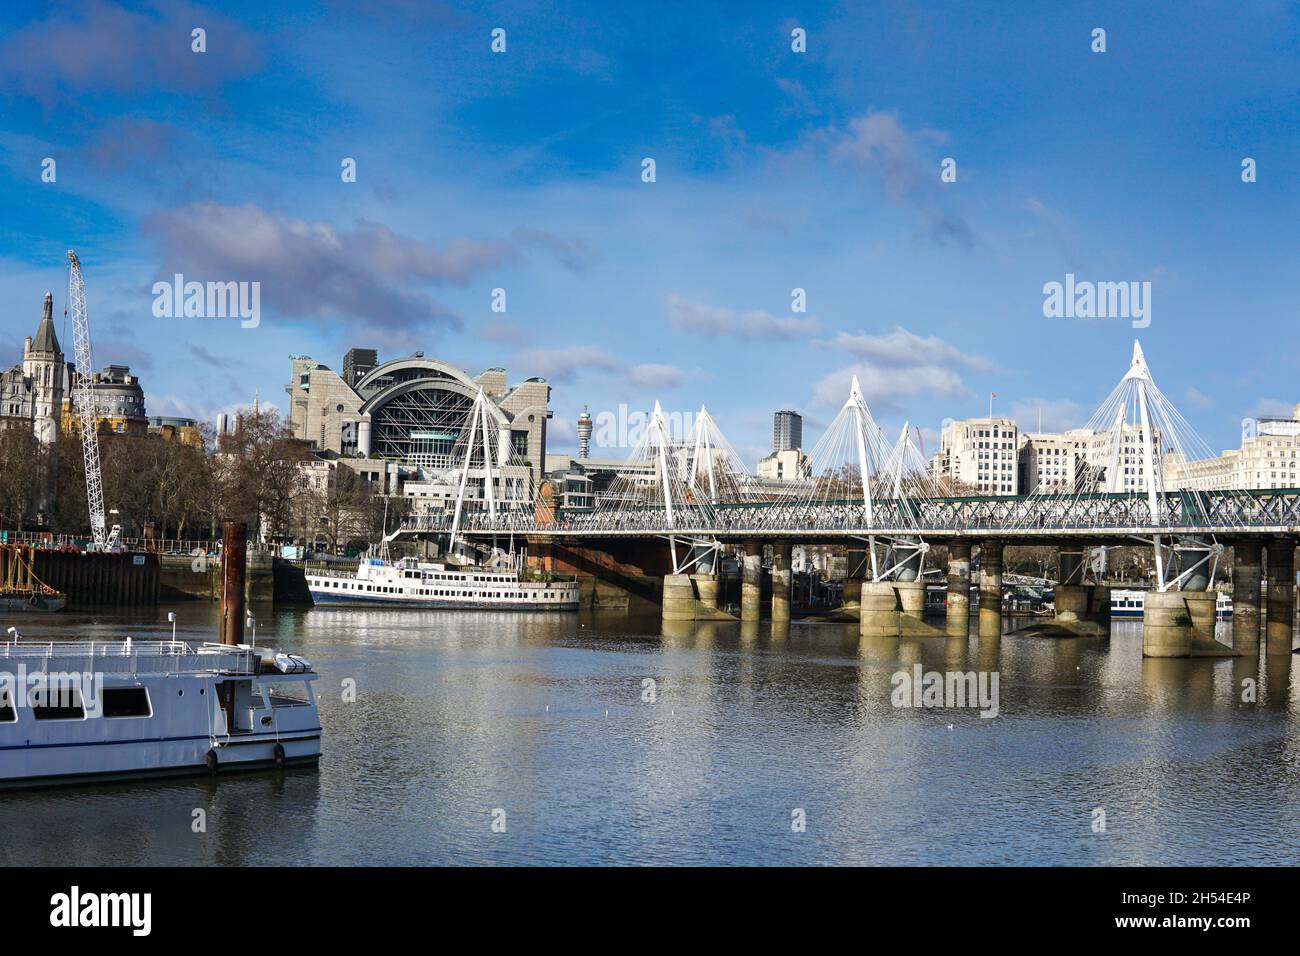 LONDON - JANUARY/18 /2021 : View towards Charing Cross Staion and Hungerford Bridge in London. golden jubilee bridge Stock Photo